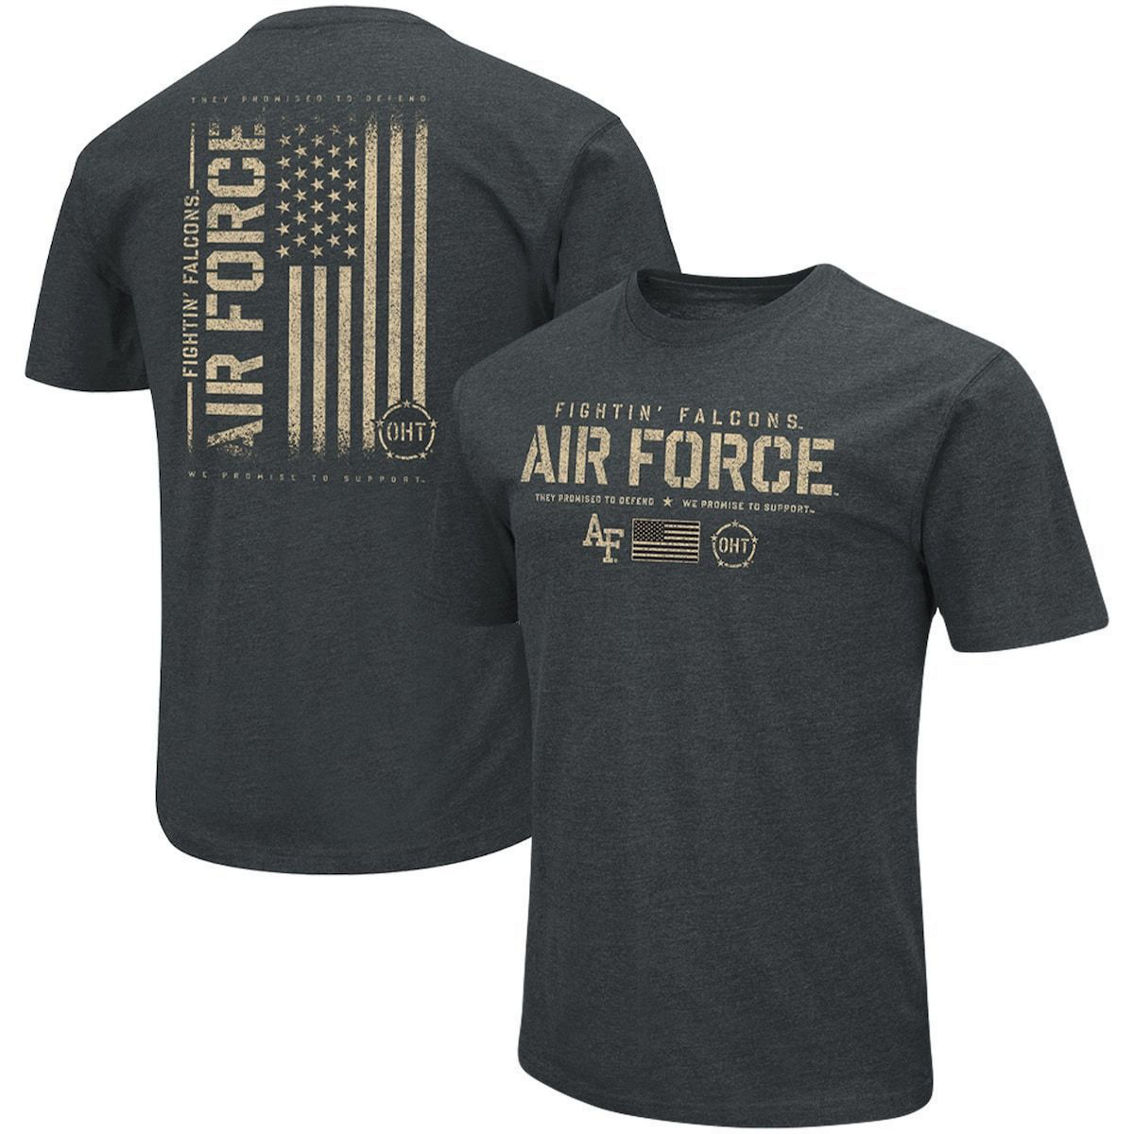 Colosseum Men's Heathered Black Air Force Falcons OHT Military Appreciation Flag 2.0 T-Shirt - Image 1 of 4